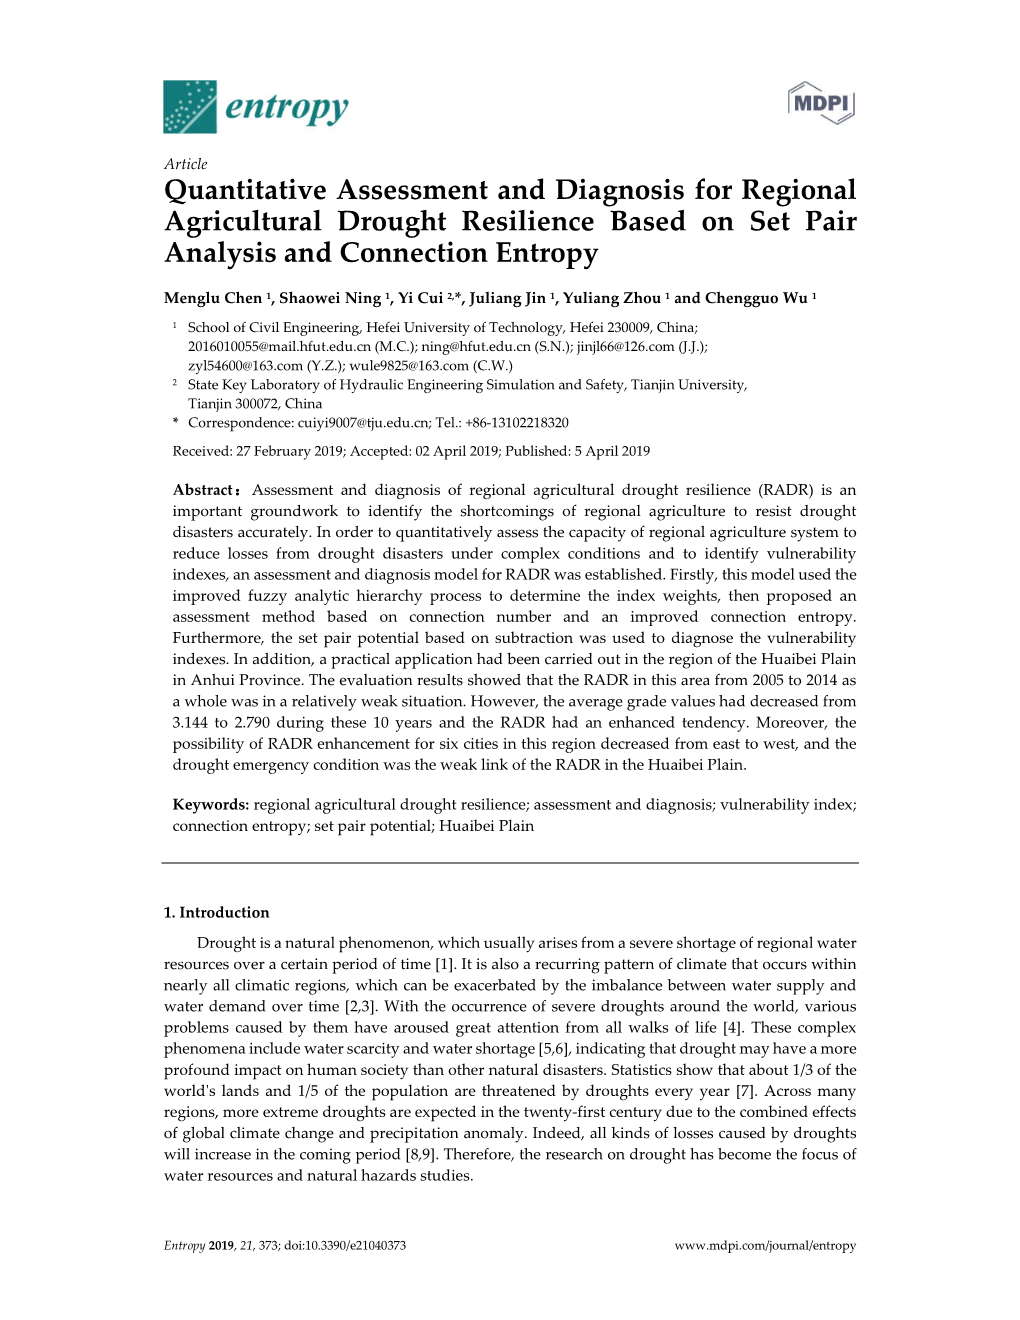 Quantitative Assessment and Diagnosis for Regional Agricultural Drought Resilience Based on Set Pair Analysis and Connection Entropy